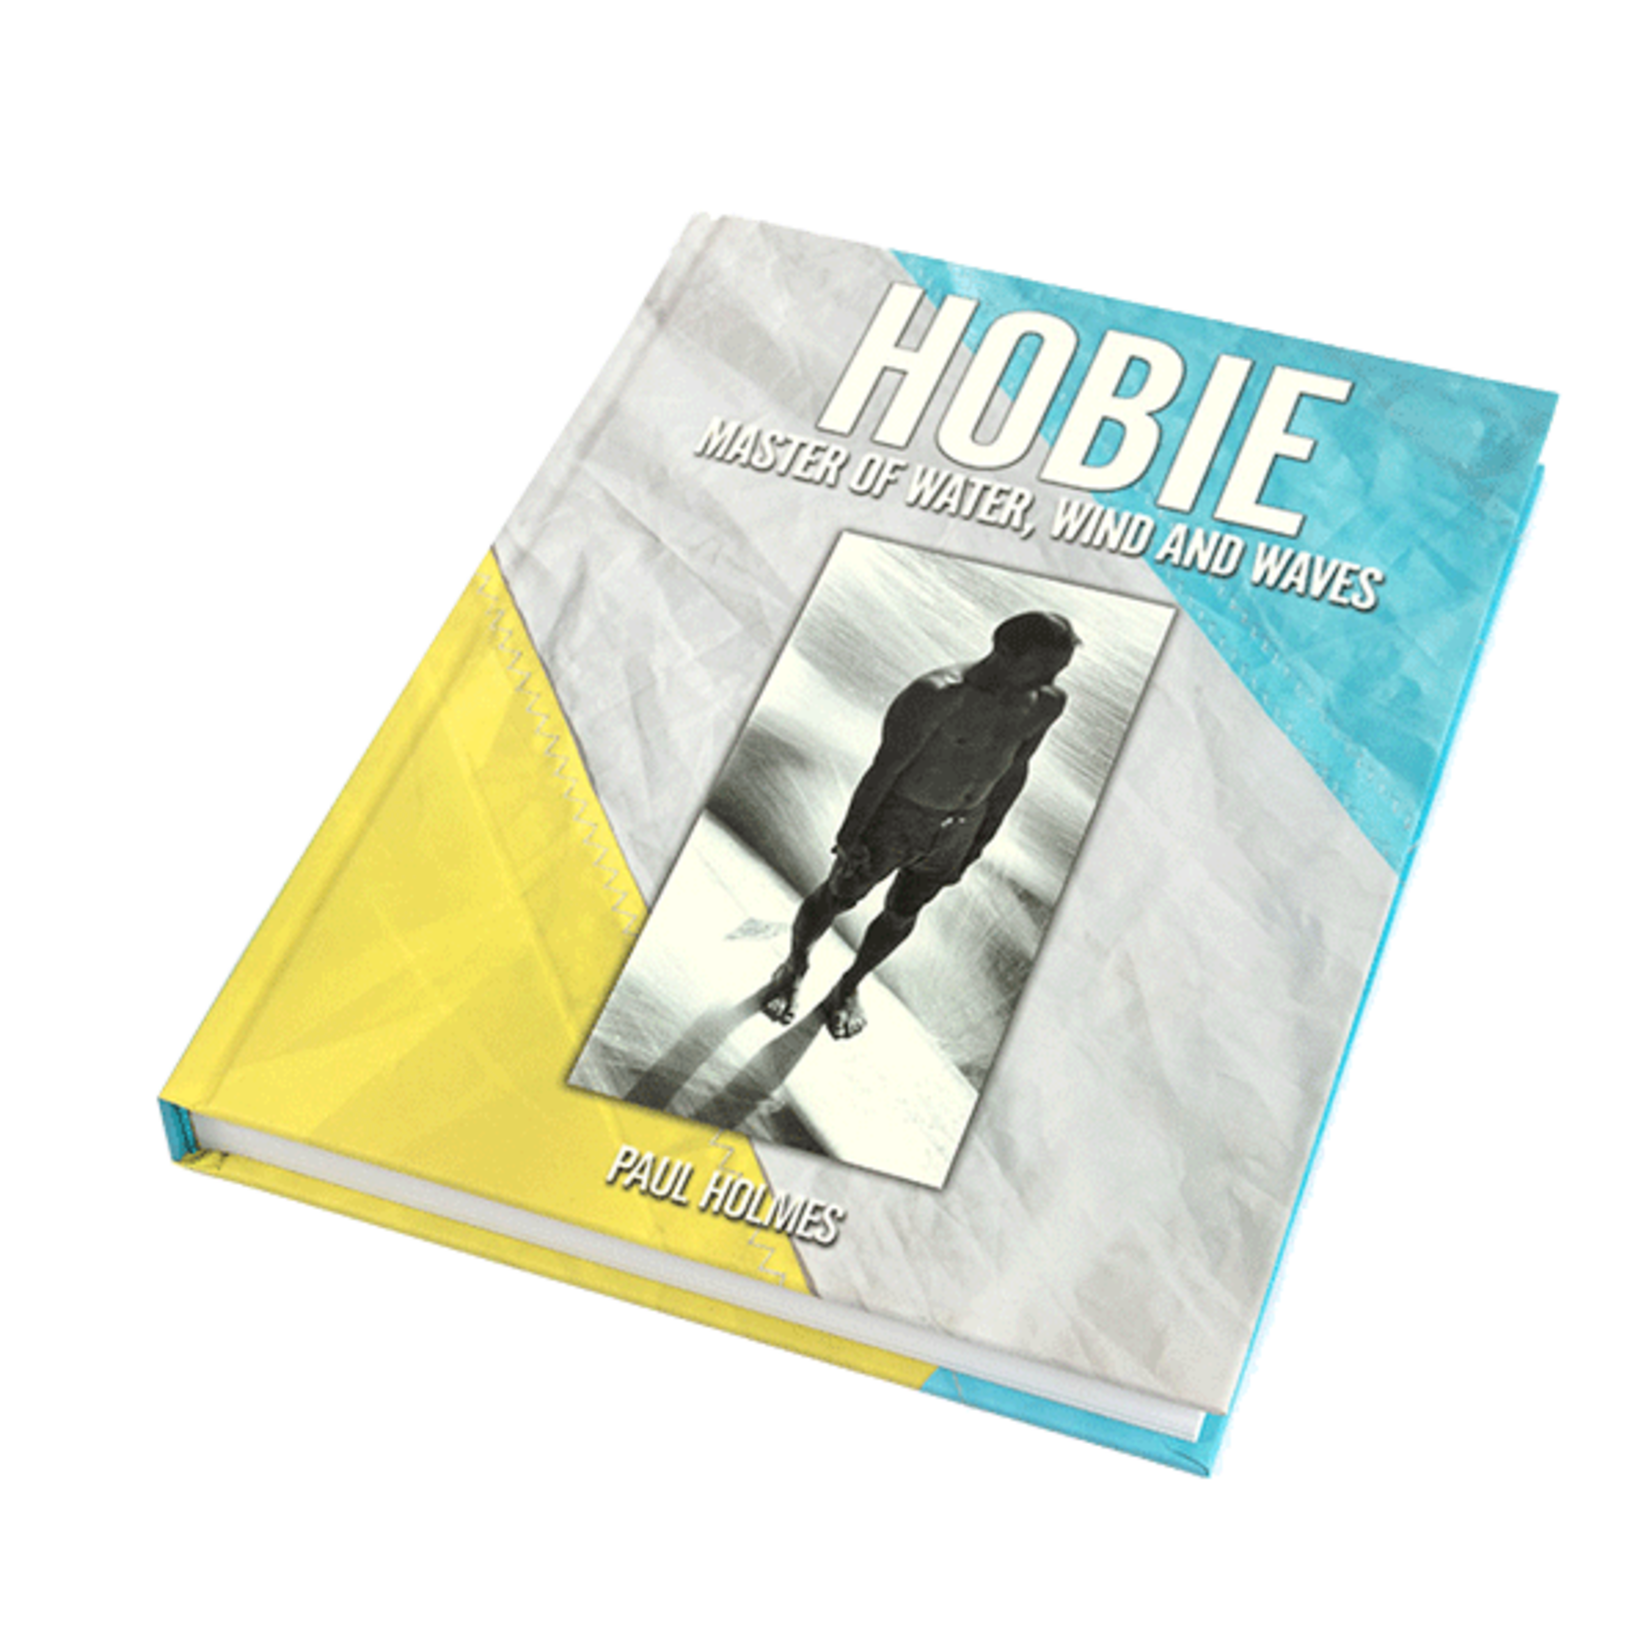 Hobie : Master of Water, Wind and Waves by Paul Holmes